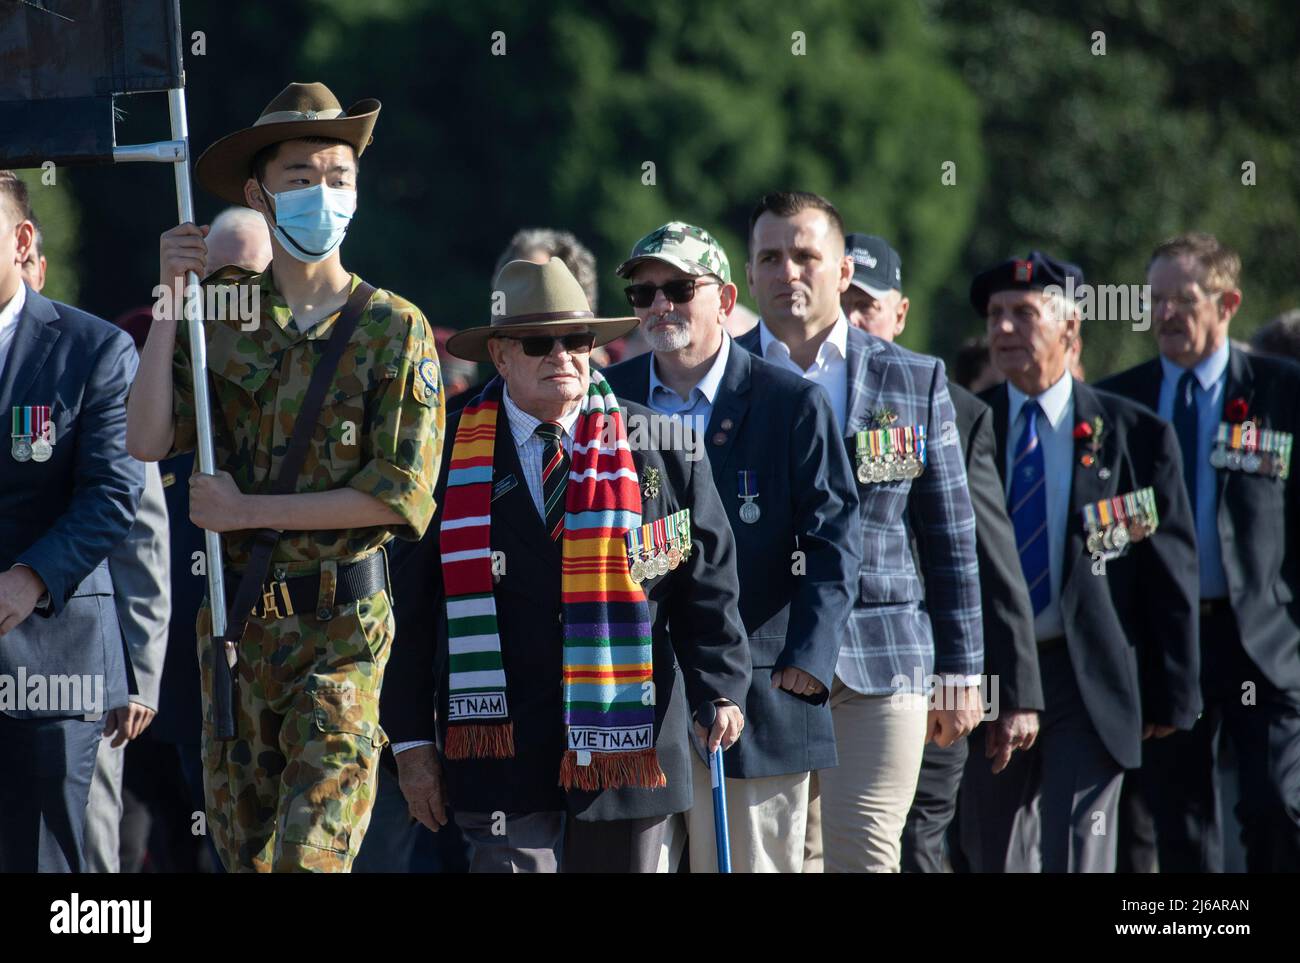 Melbourne Australia: Anzac Day parade at Shrine of Remembrance. ANZAC' stands for Australian and New Zealand Army Corps. Stock Photo